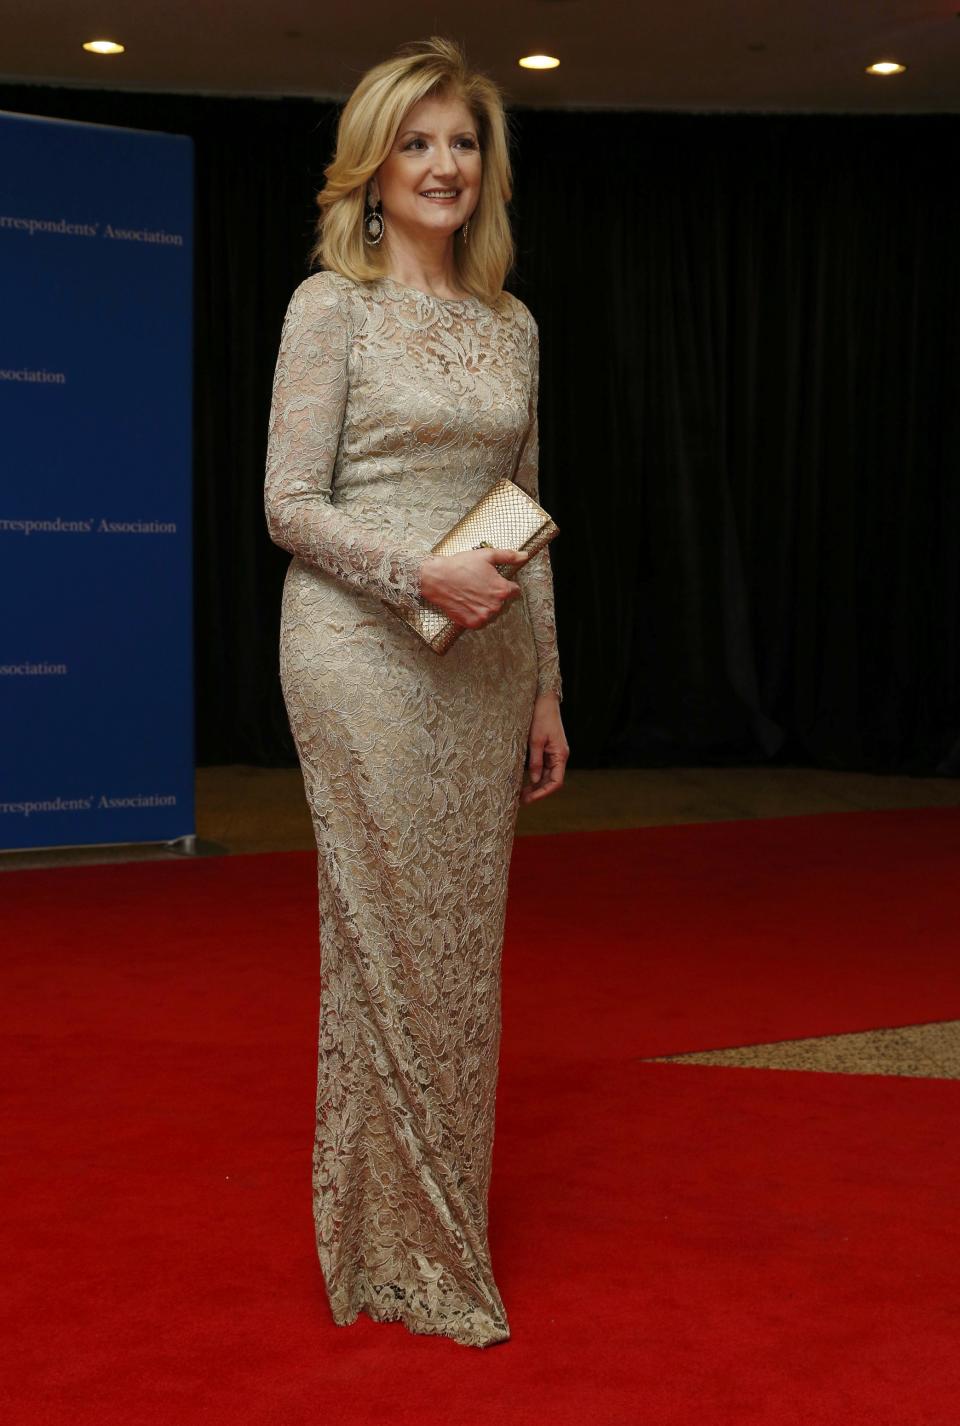 Author and columnist Arianna Huffington arrives on the red carpet at the annual White House Correspondents' Association Dinner in Washington, May 3, 2014. (REUTERS/Jonathan Ernst)